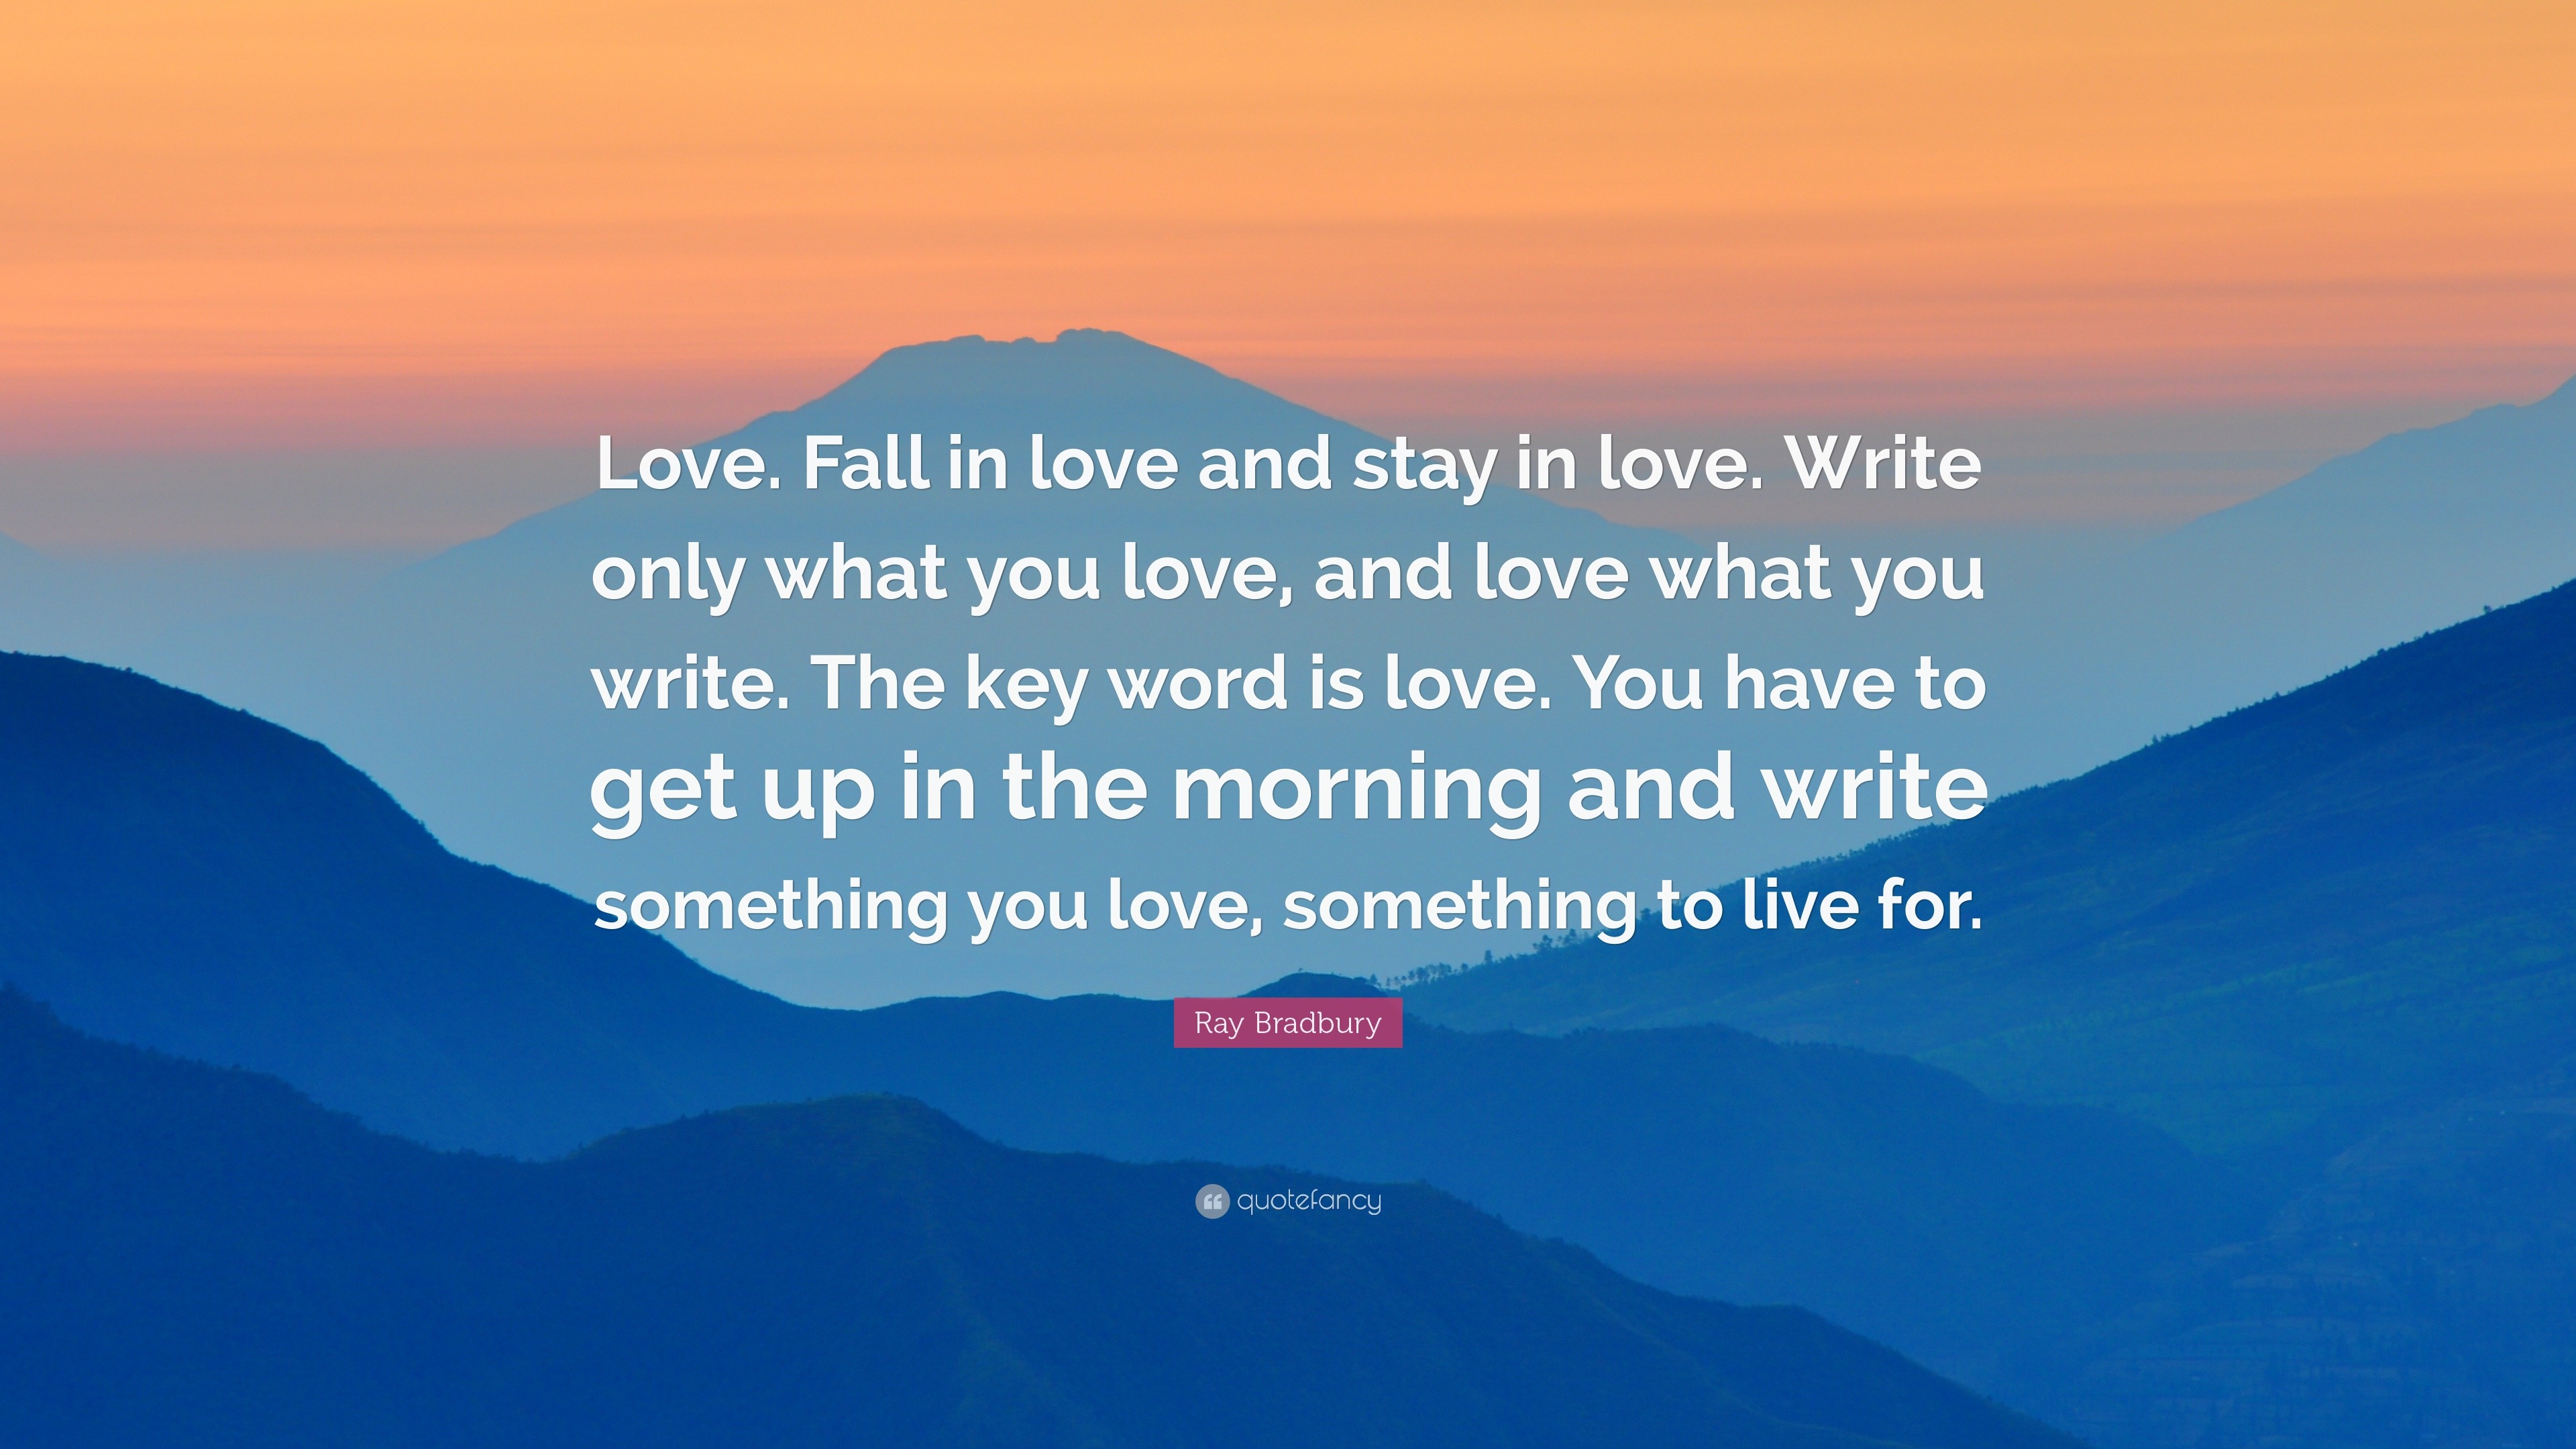 Ray Bradbury Quote “Love. Fall in love and stay in love. Write only